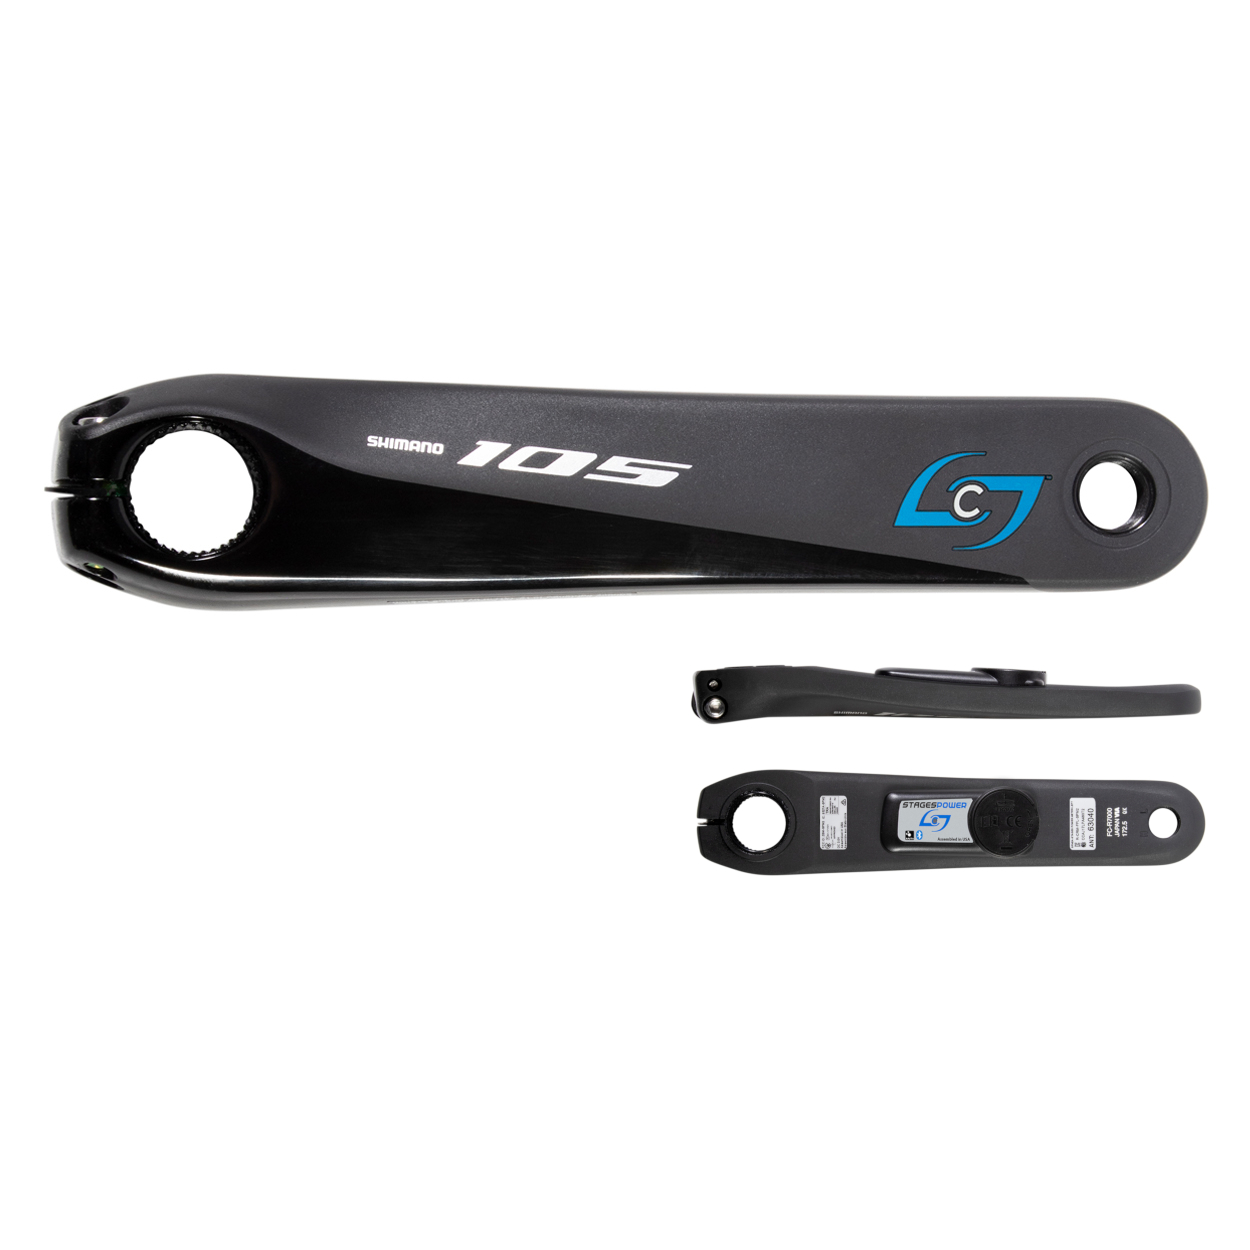 Productfoto van Stages Cycling Power L Powermeter | Crank Arm by Shimano - 105 R7000 - black